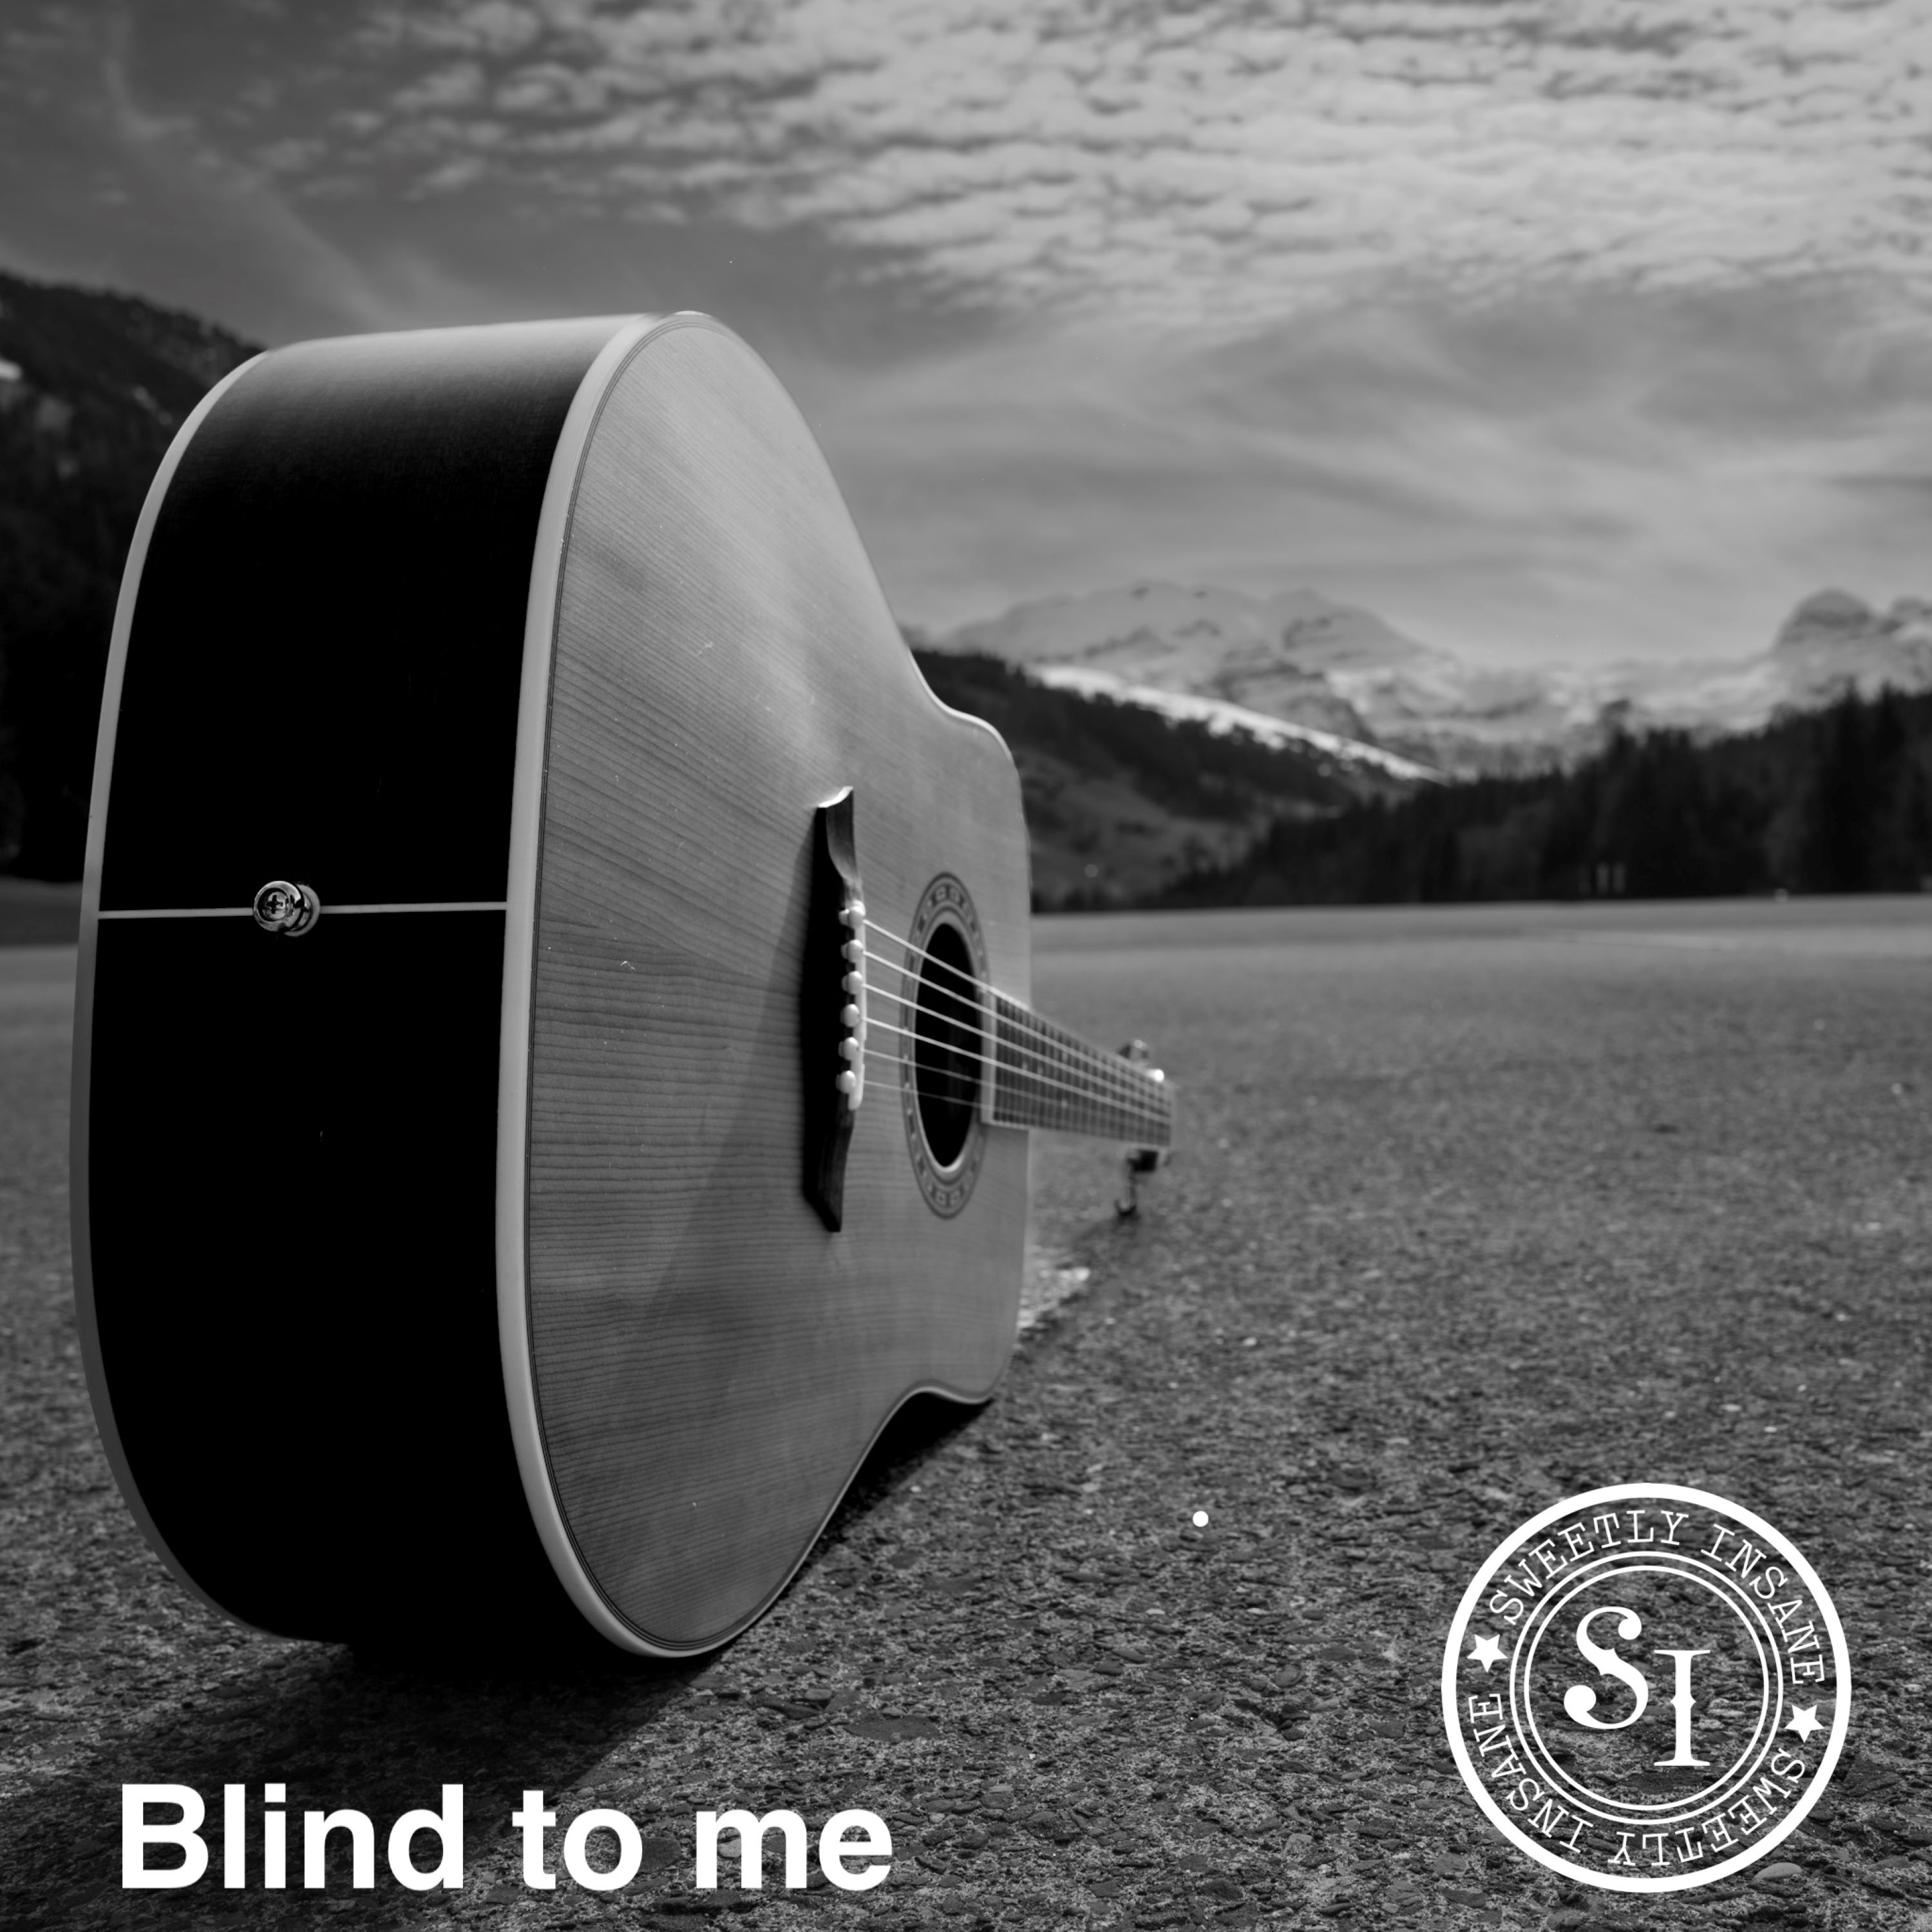 New Single "Blind to me" ! ! !